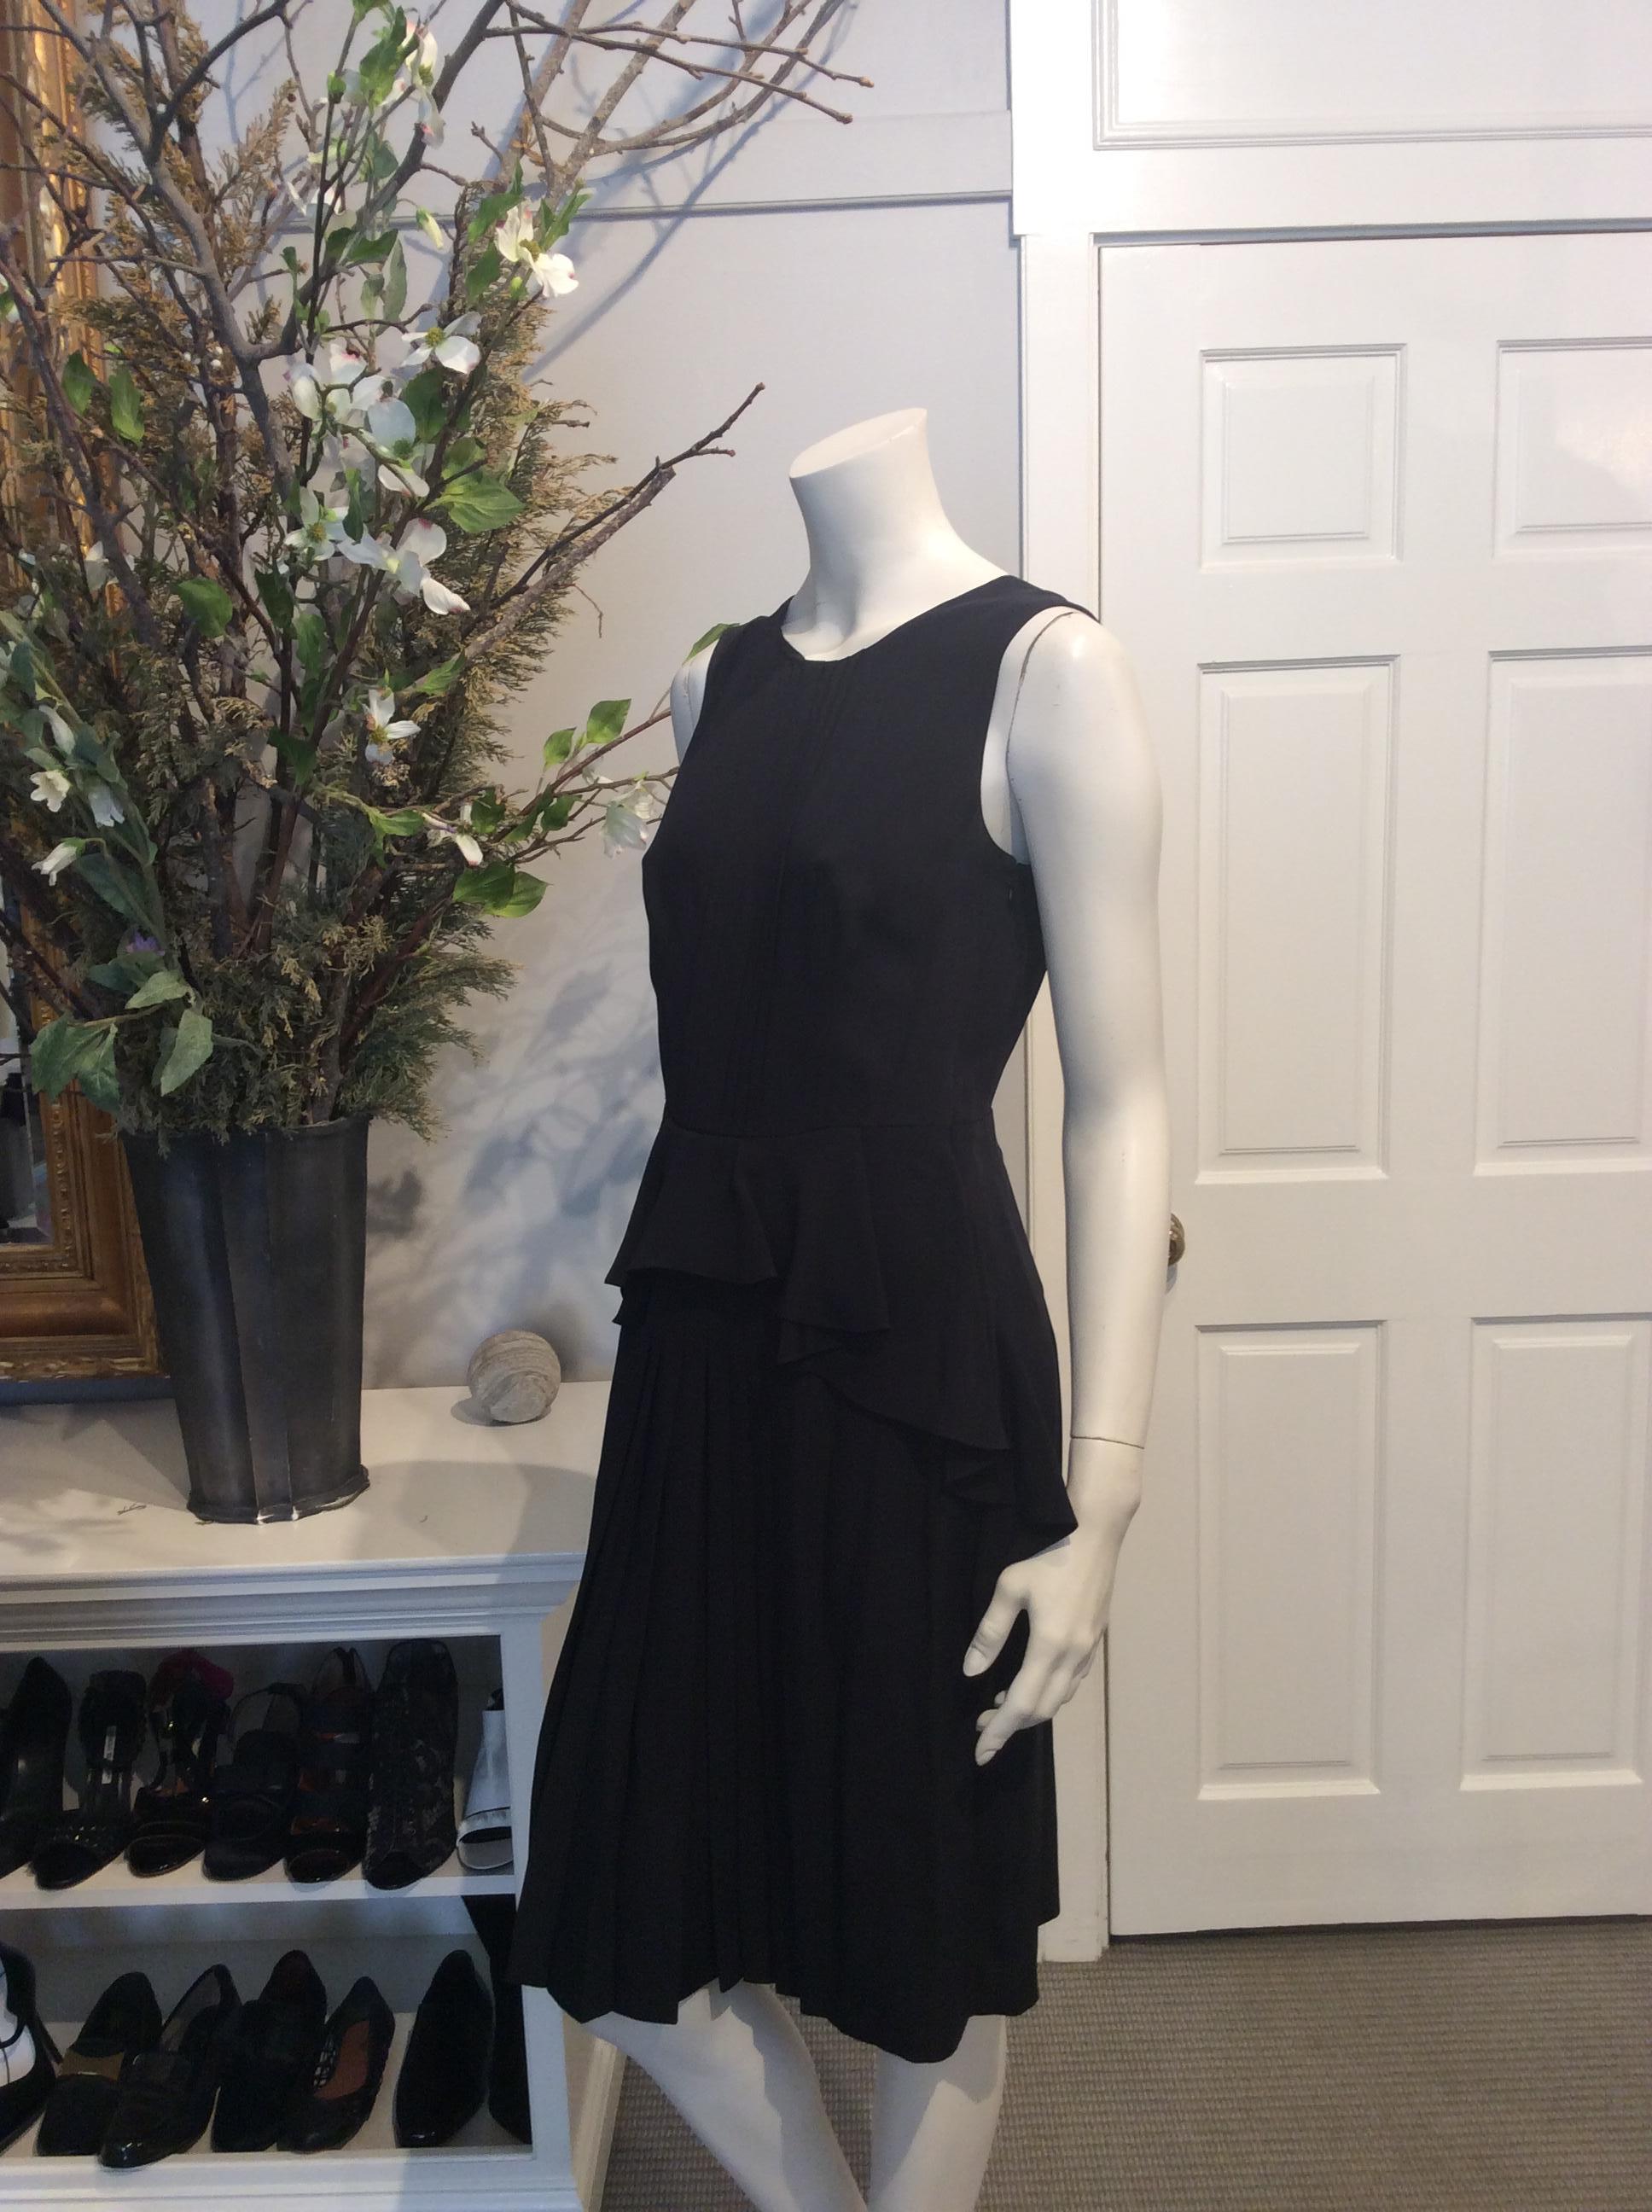 Women's New Prada Black Silk Dress with Draping at Hips and Front Pleating Sz 42/Us6 For Sale